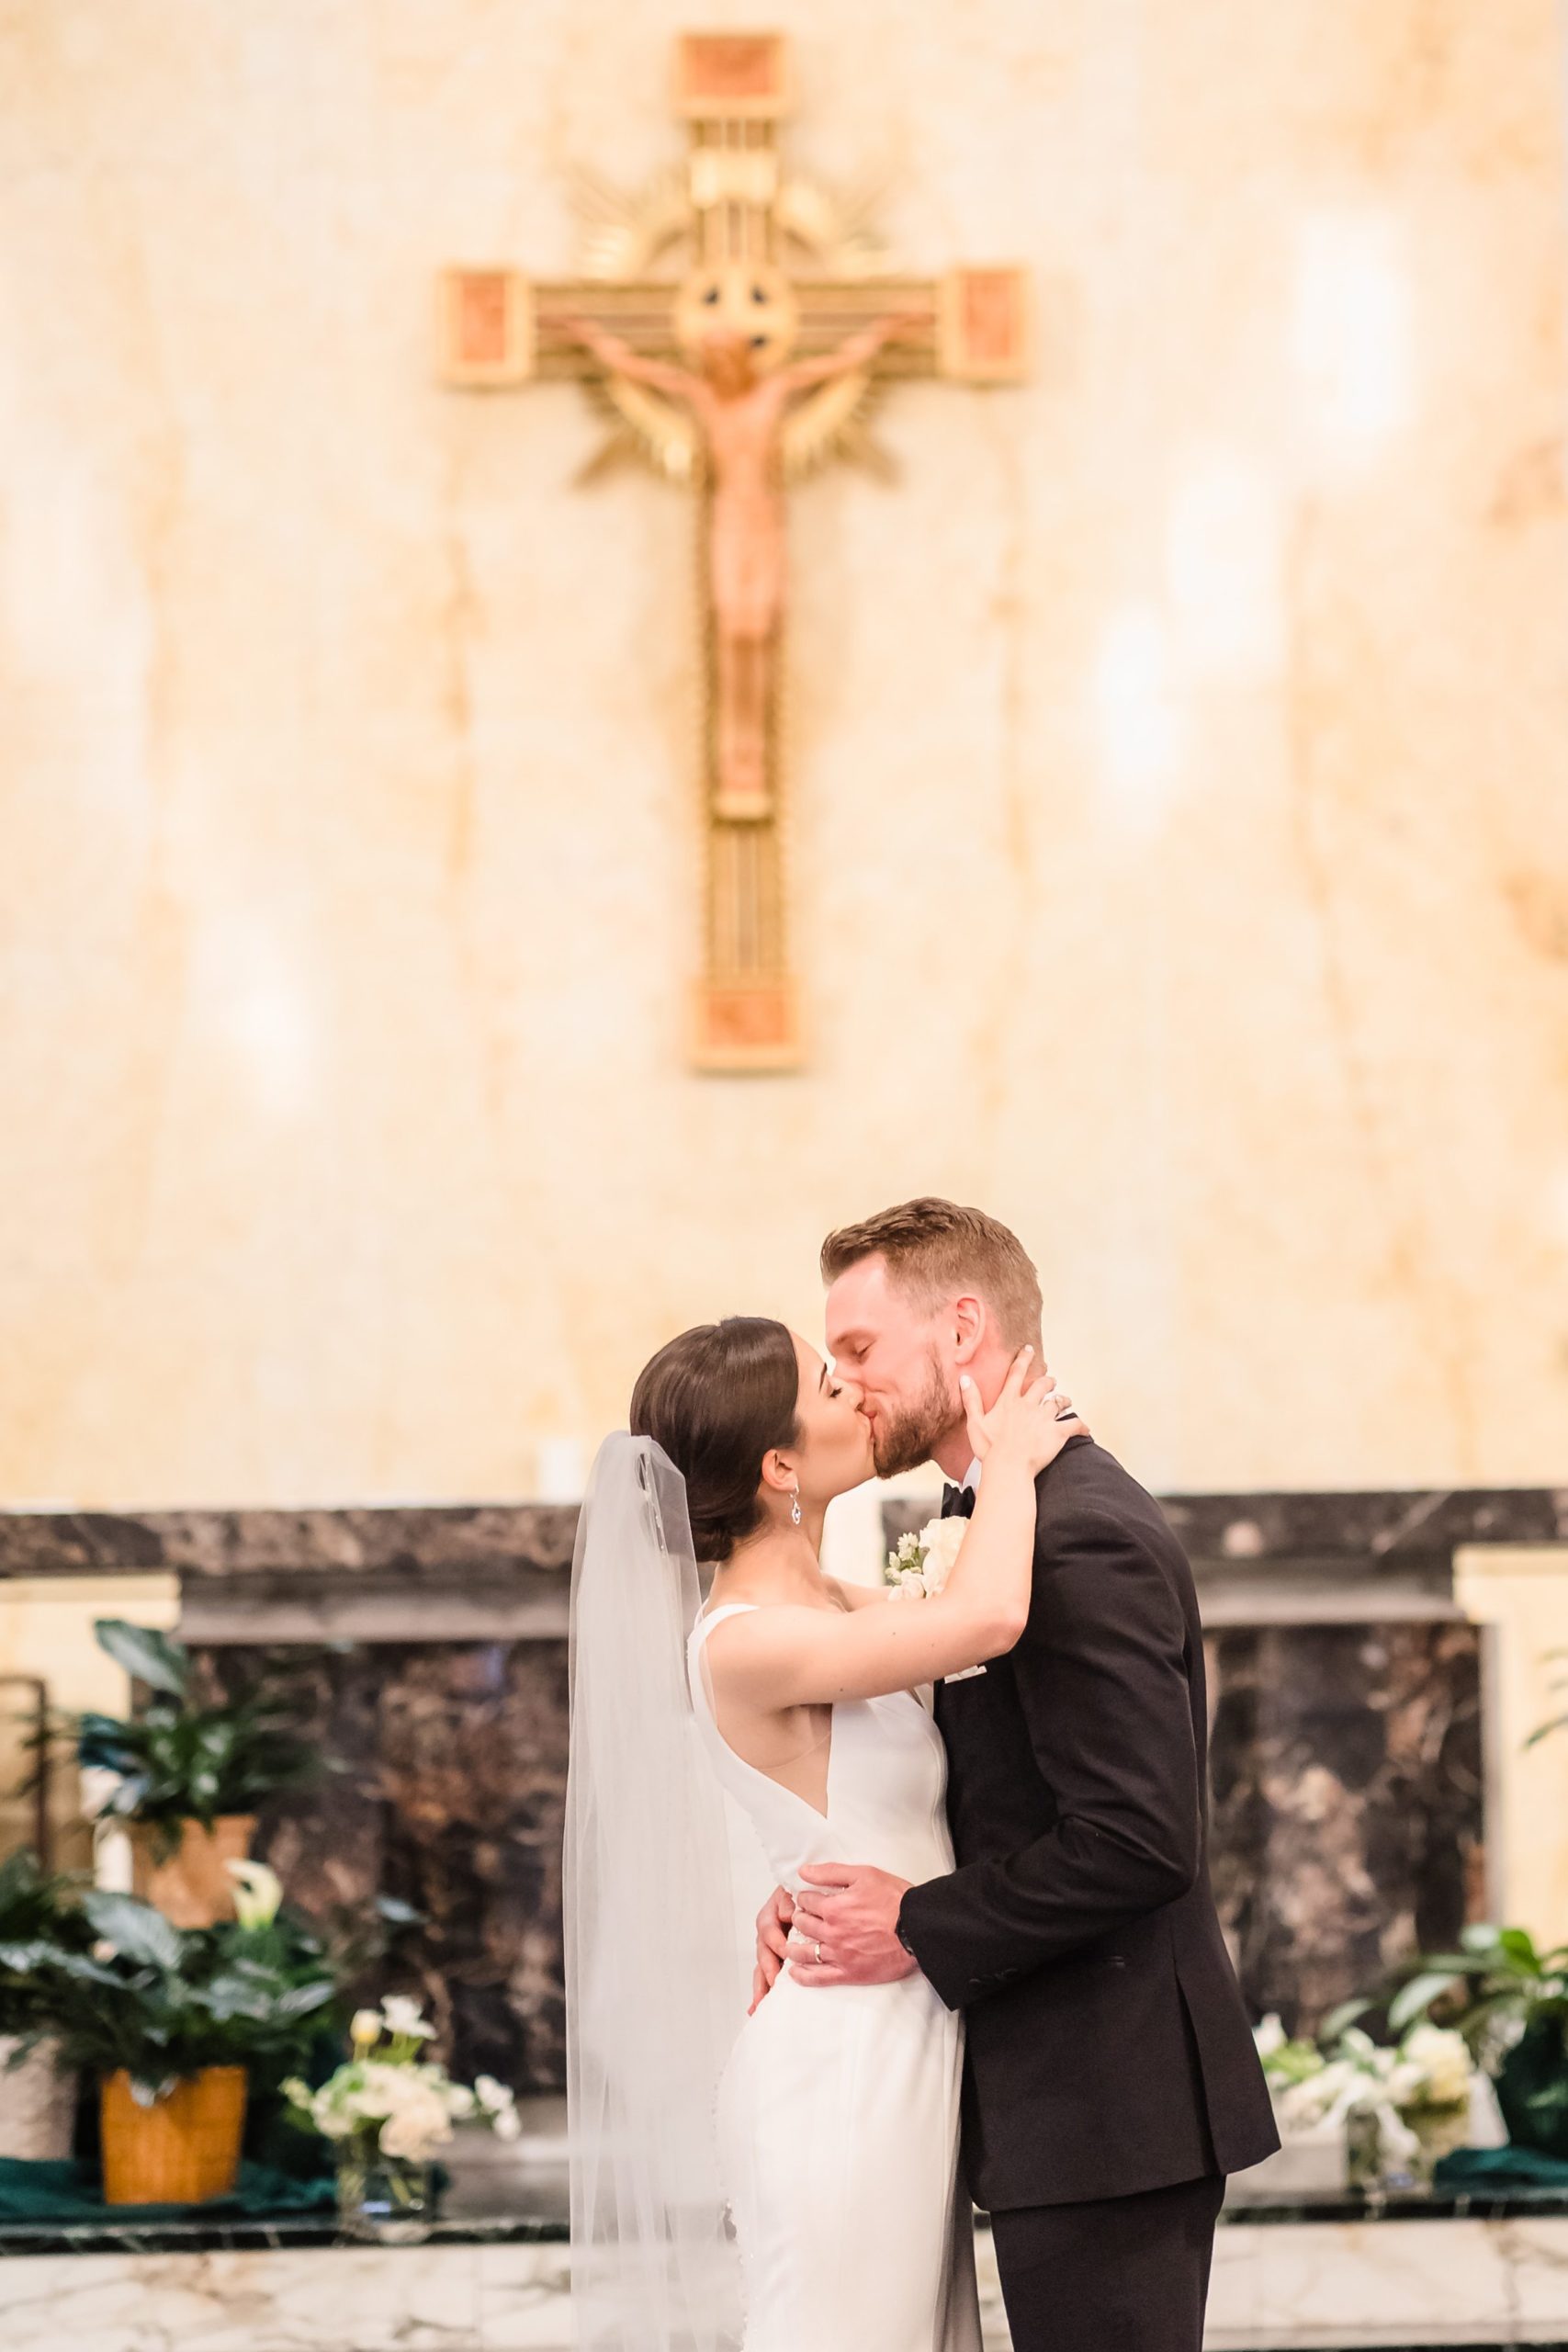 Bride and groom share their first kiss during their wedding at Our Lady of the Wayside Church in Illinois.